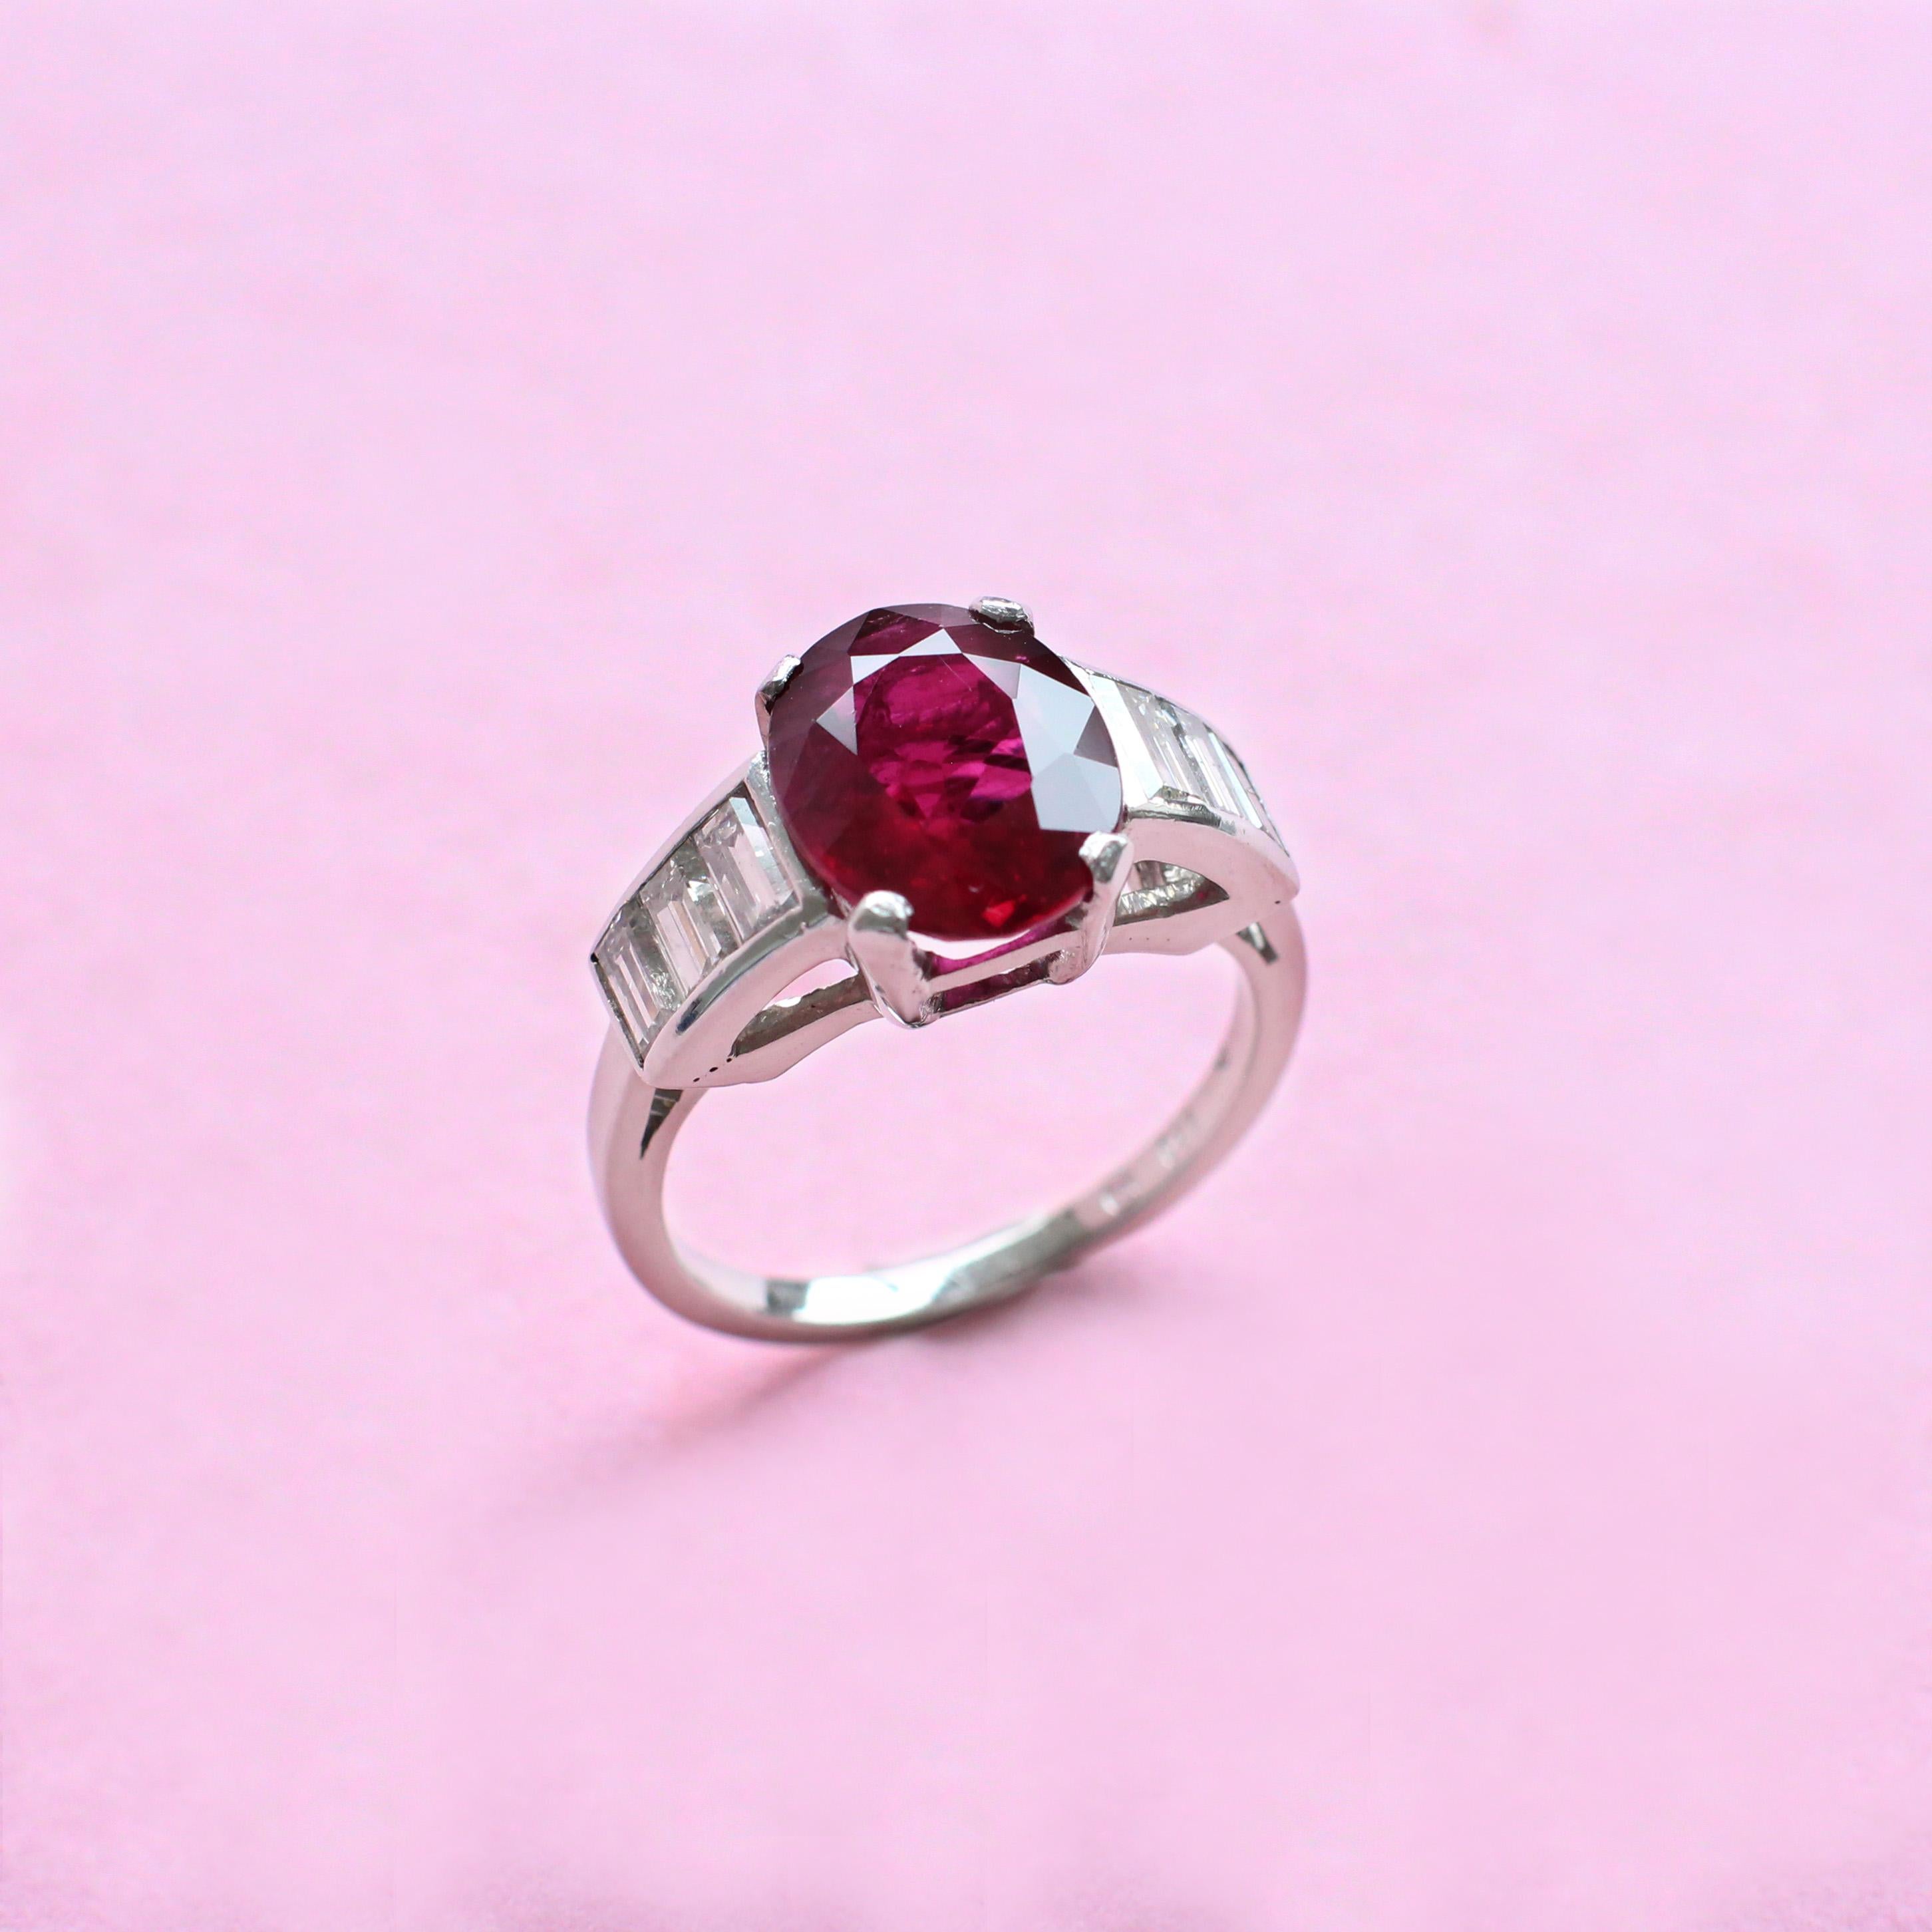 The elegant oval ruby at the centre of this arresting ring was hand-picked from the Haruni vault and boasts a deep, rich red colour. It sits on an exquisite platinum band and is supported on each side by sparkling white baguette diamonds, whose